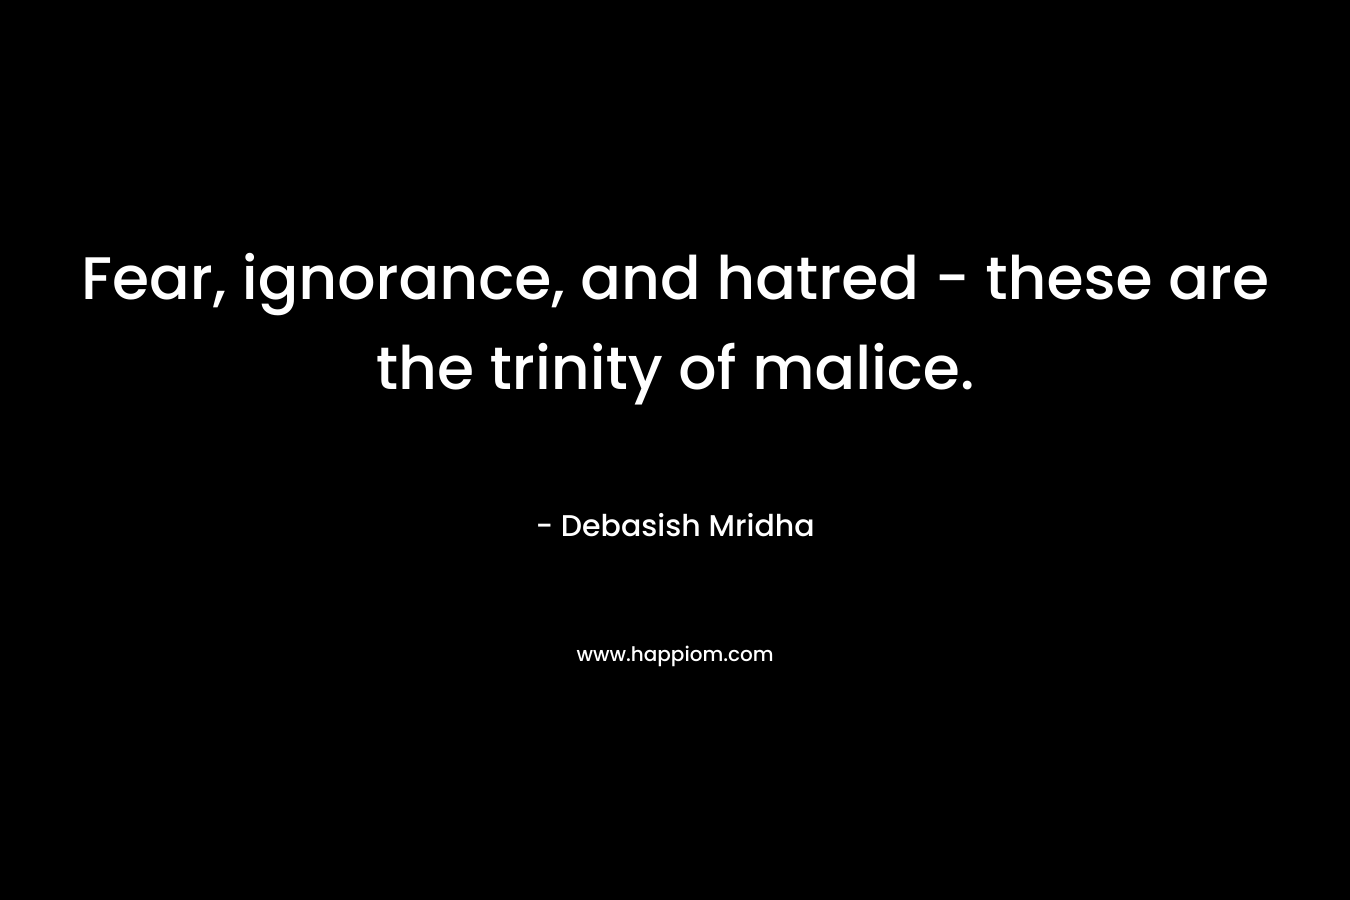 Fear, ignorance, and hatred - these are the trinity of malice.